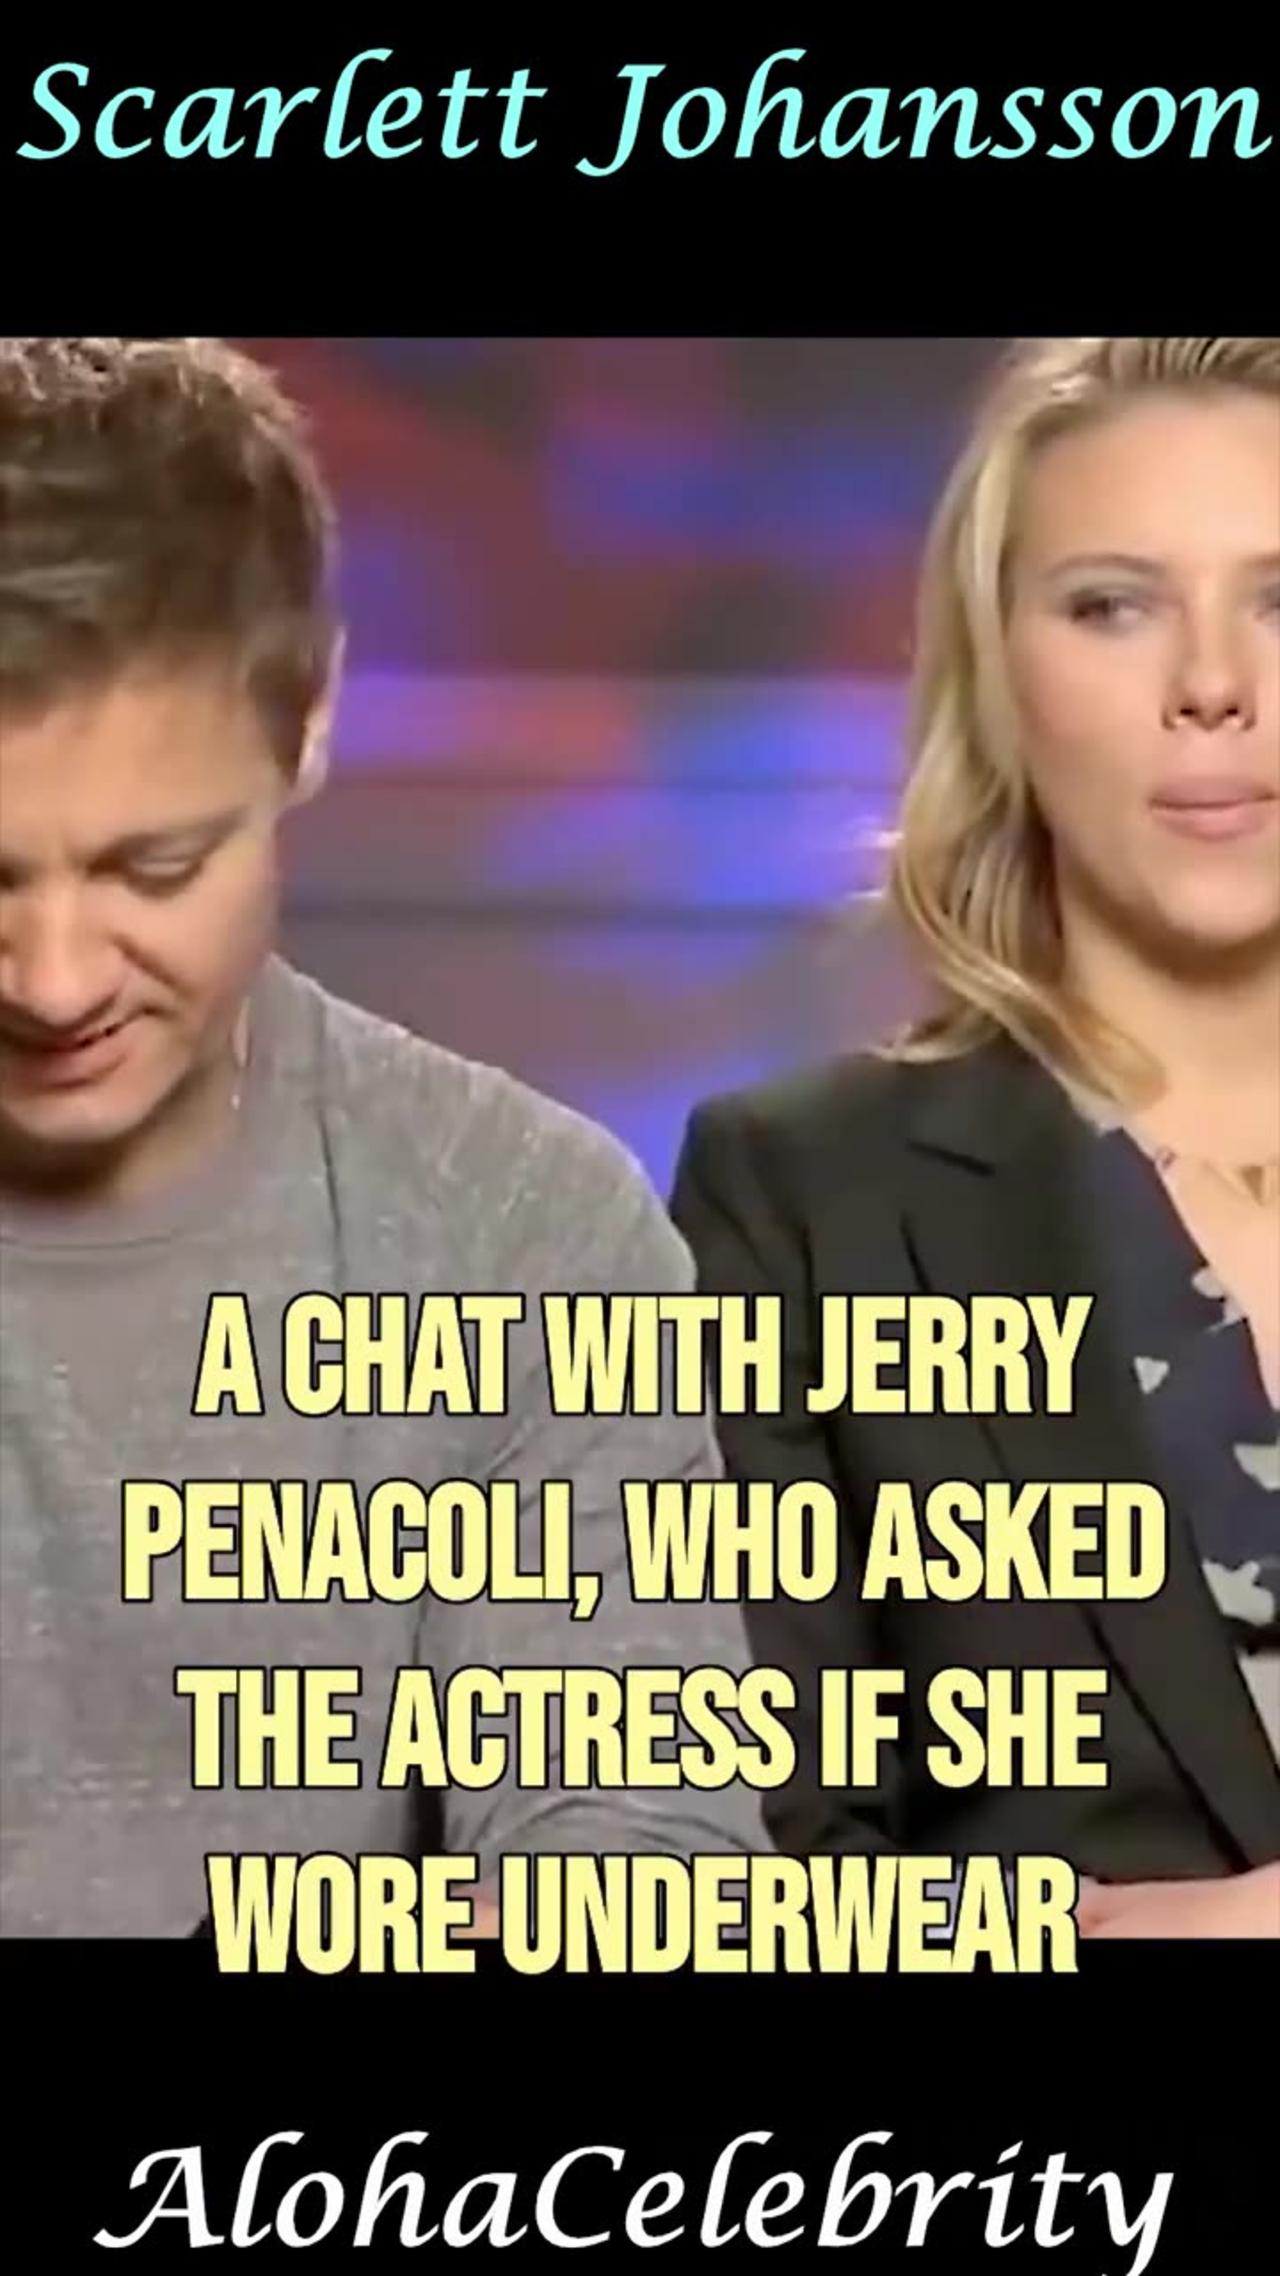 Scarlett Johansson disses Jerry Penacoli when asked if she wore undergarments in Black Widow #Shorts